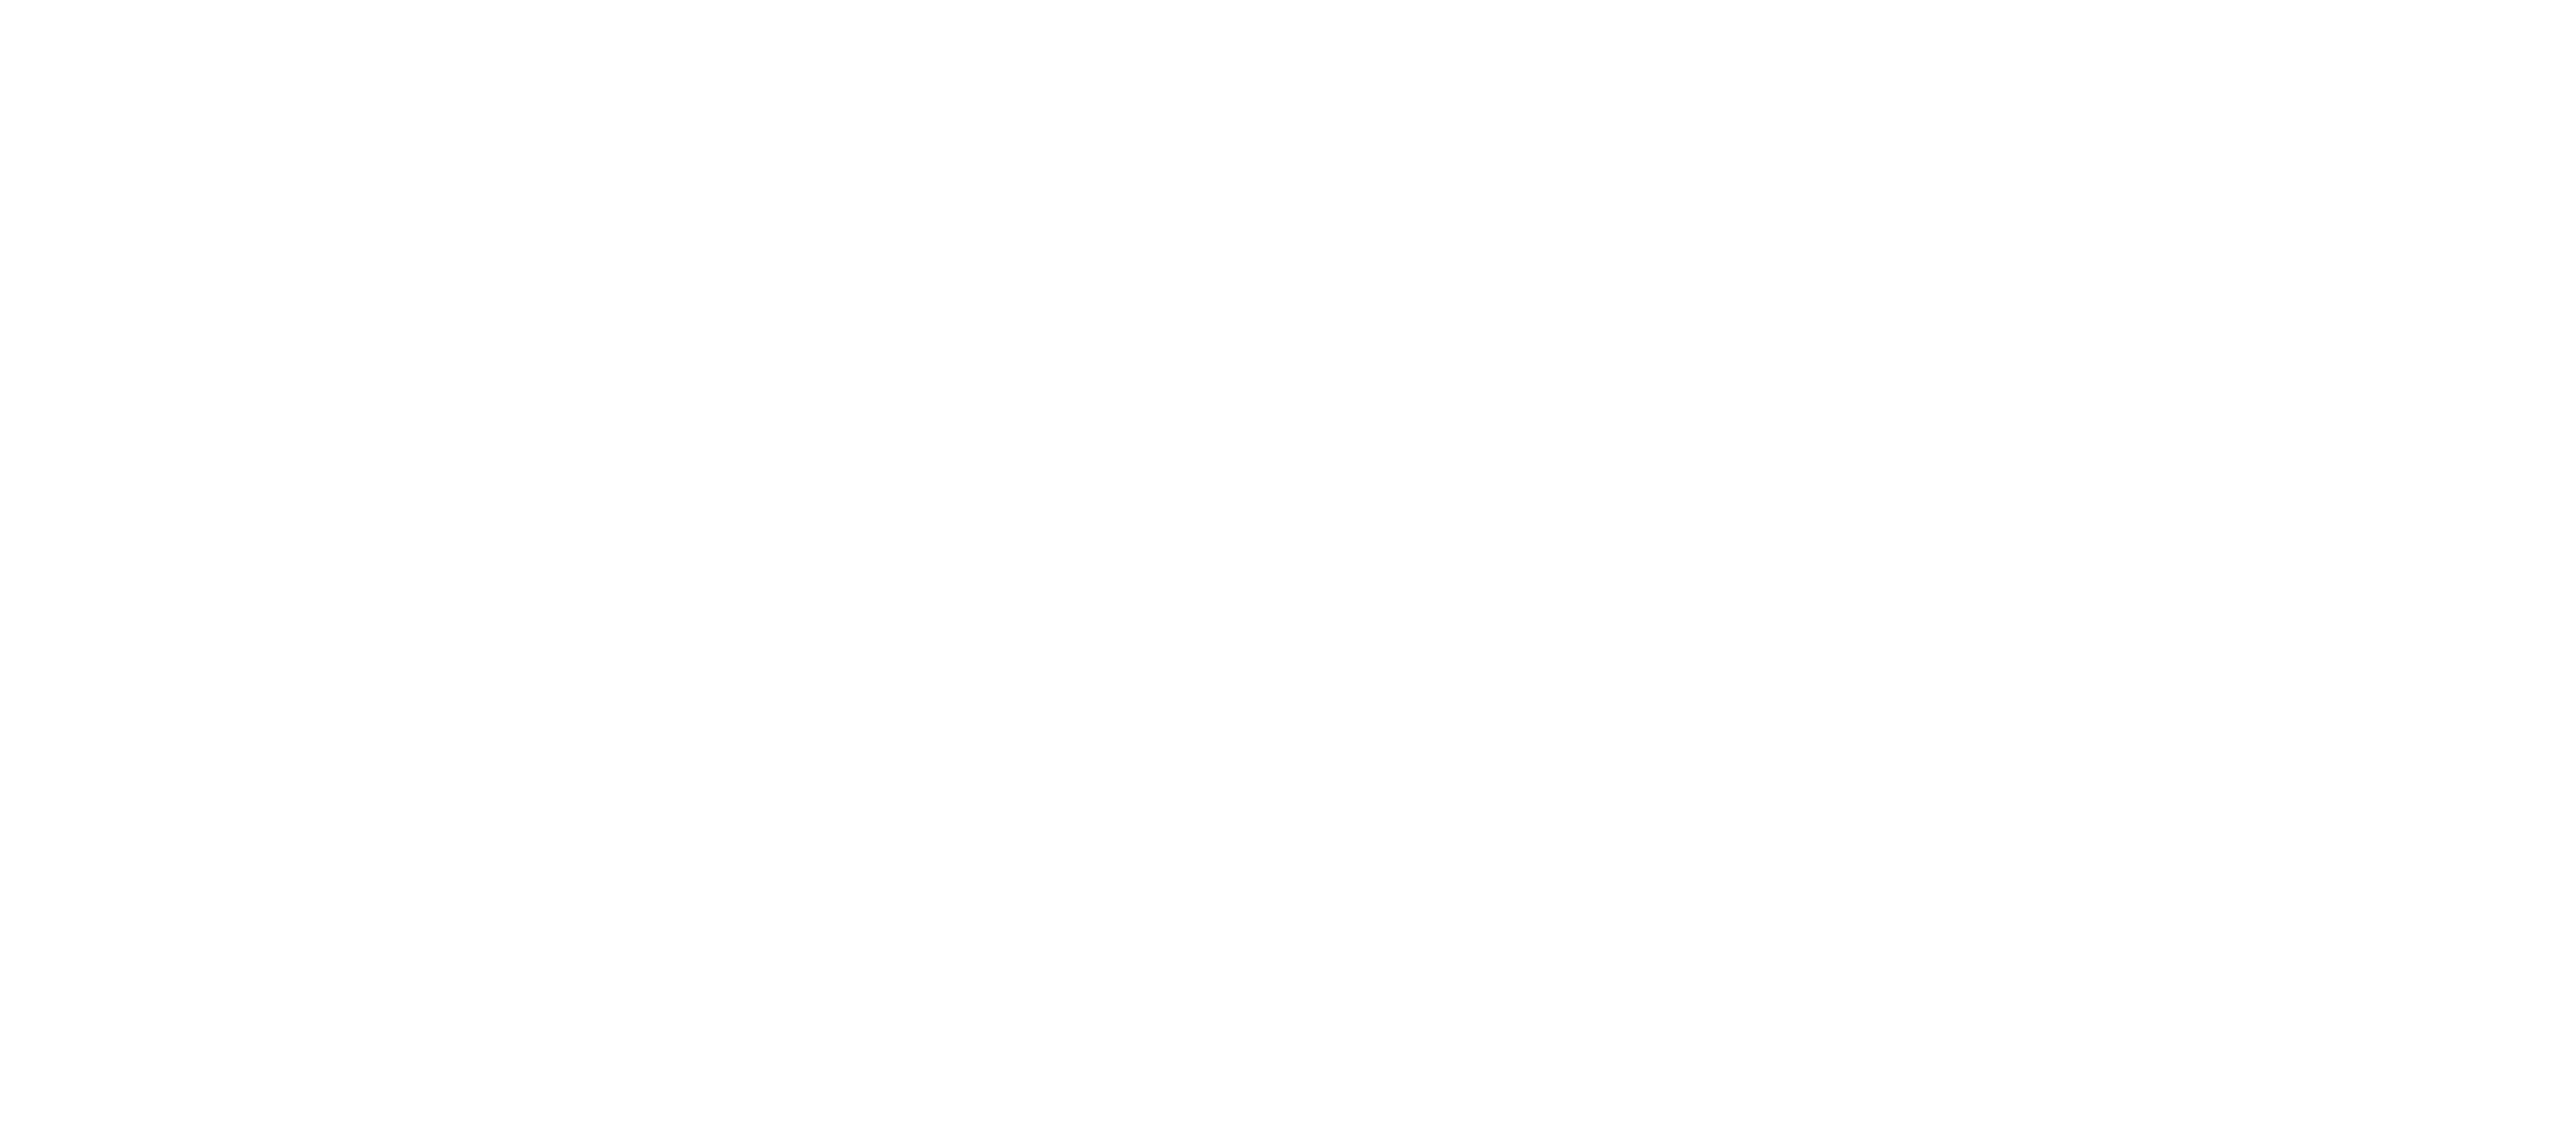 The Scariest Story Ever: A Mickey Mouse Halloween Spooktacular logo